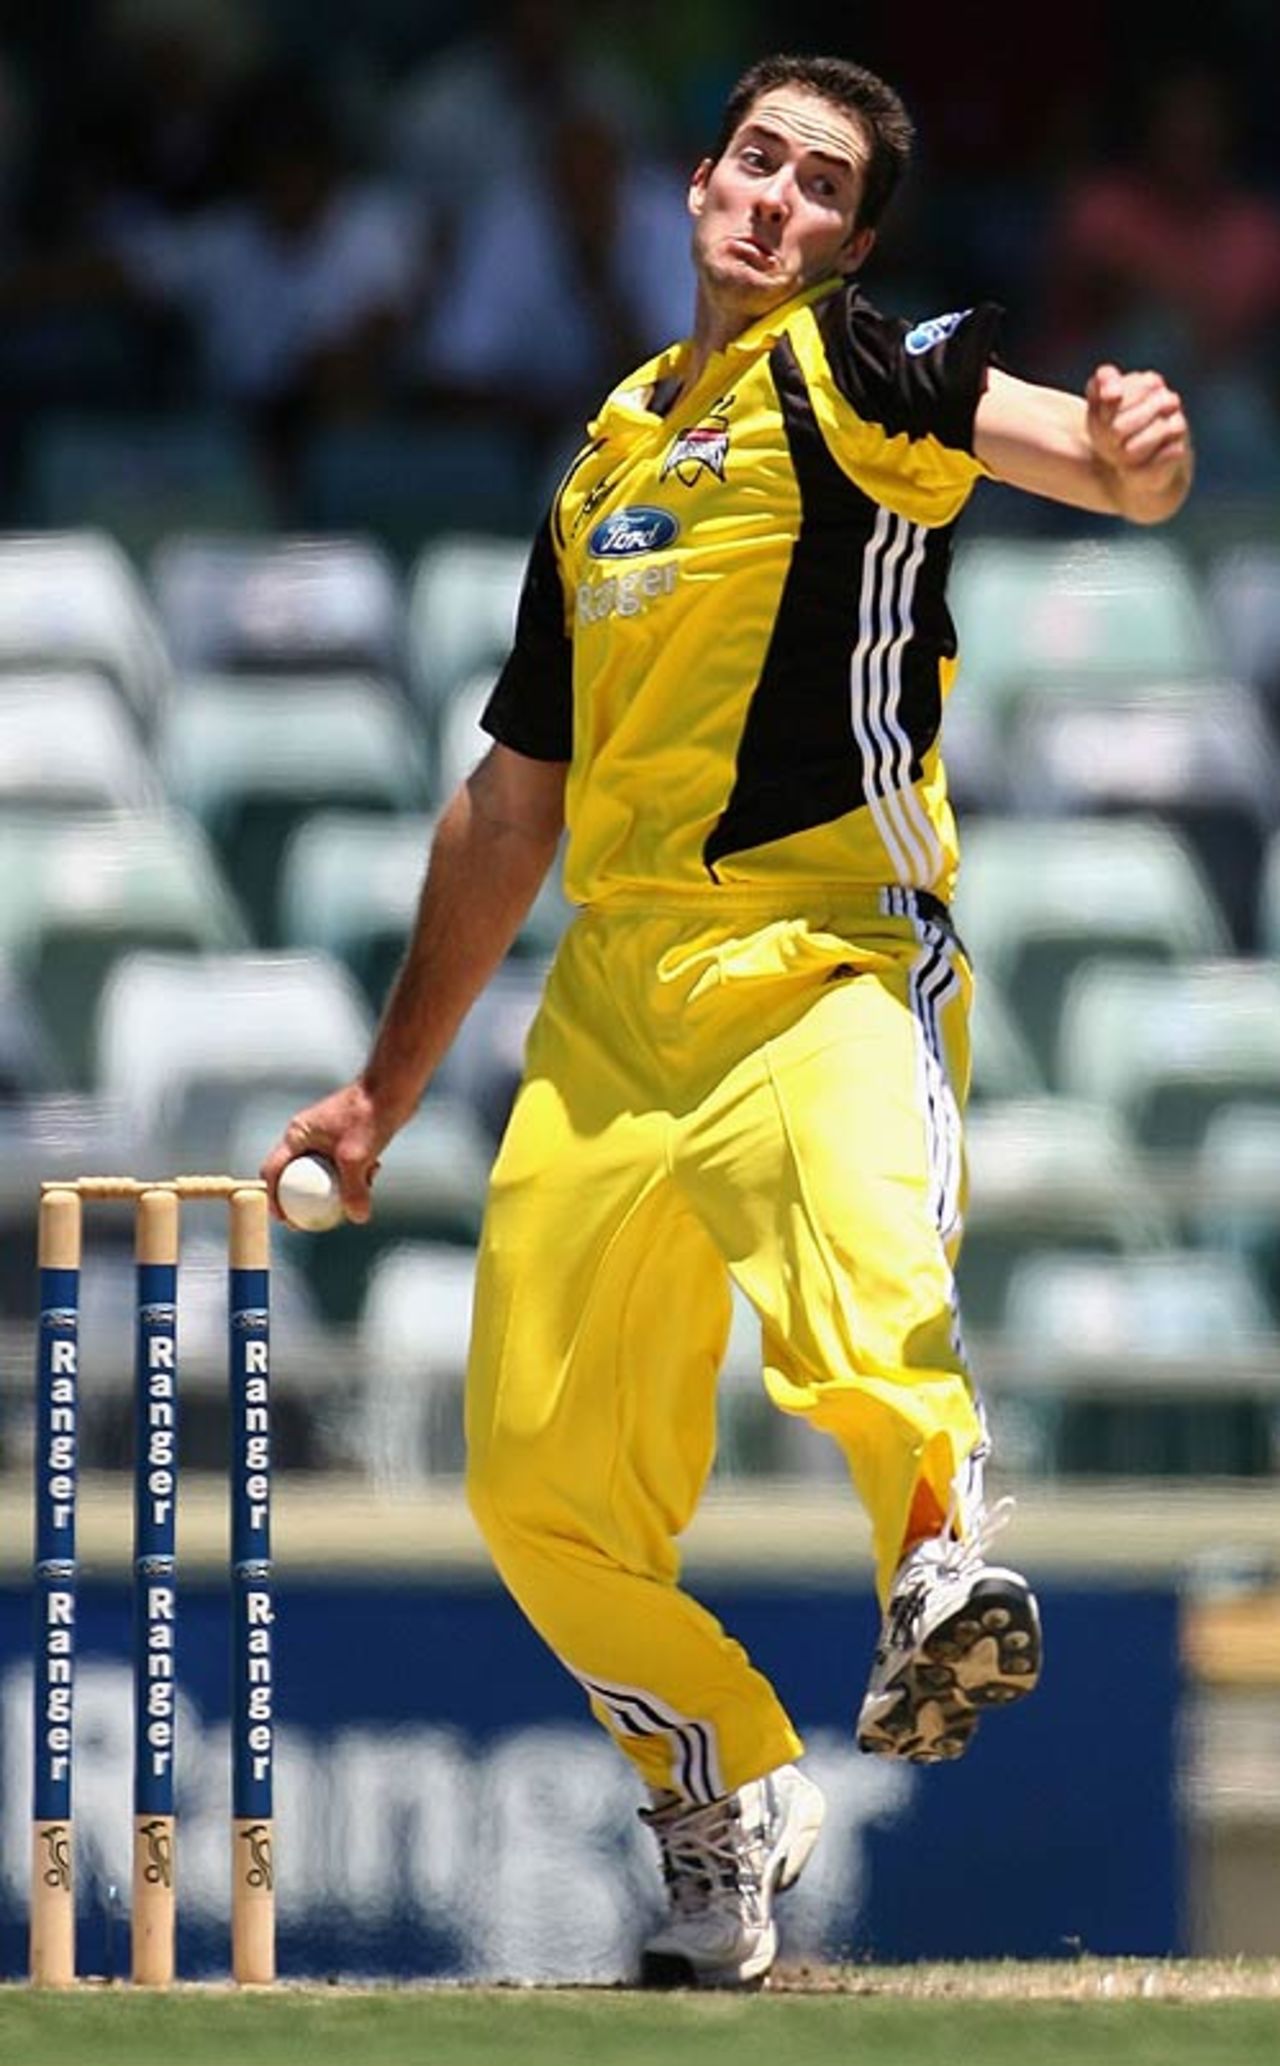 Ben Edmondson sends down a delivery during his spell of 5 for 39, Western Australia v South Australia, FR Cup, Perth, January 17, 2007